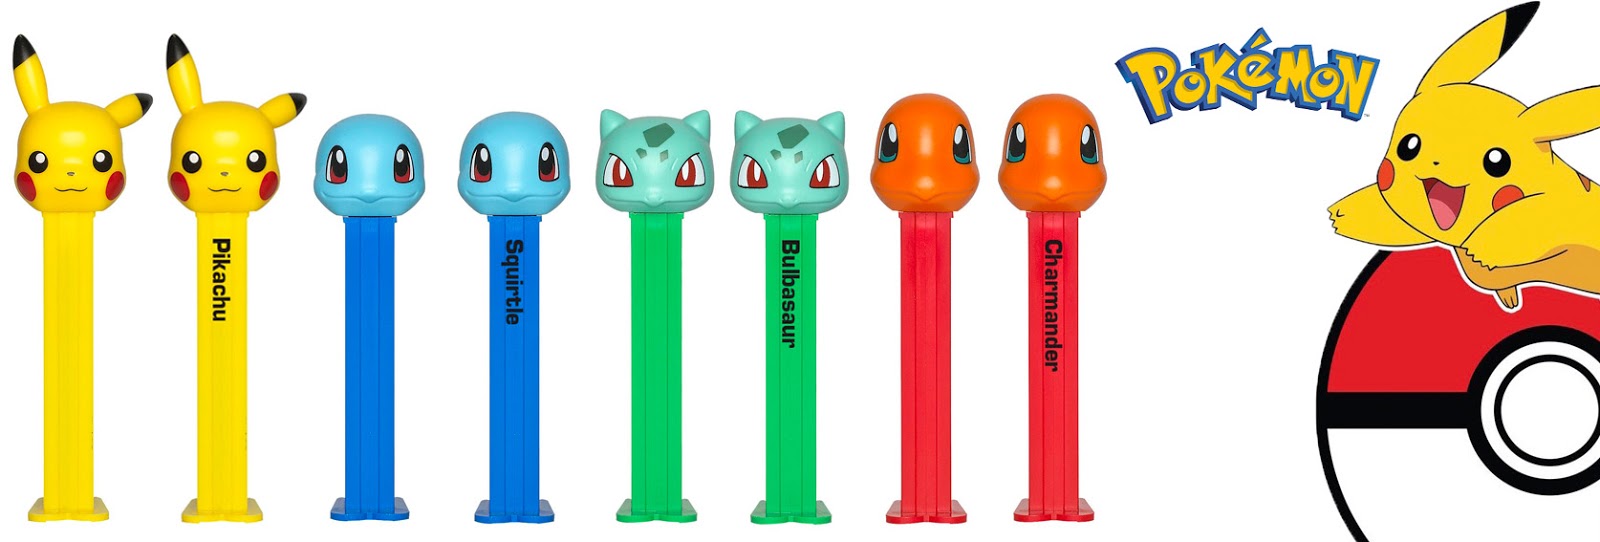 PEZ Pokemon boxed set of 4 wih names printed on the stems 2019 release 